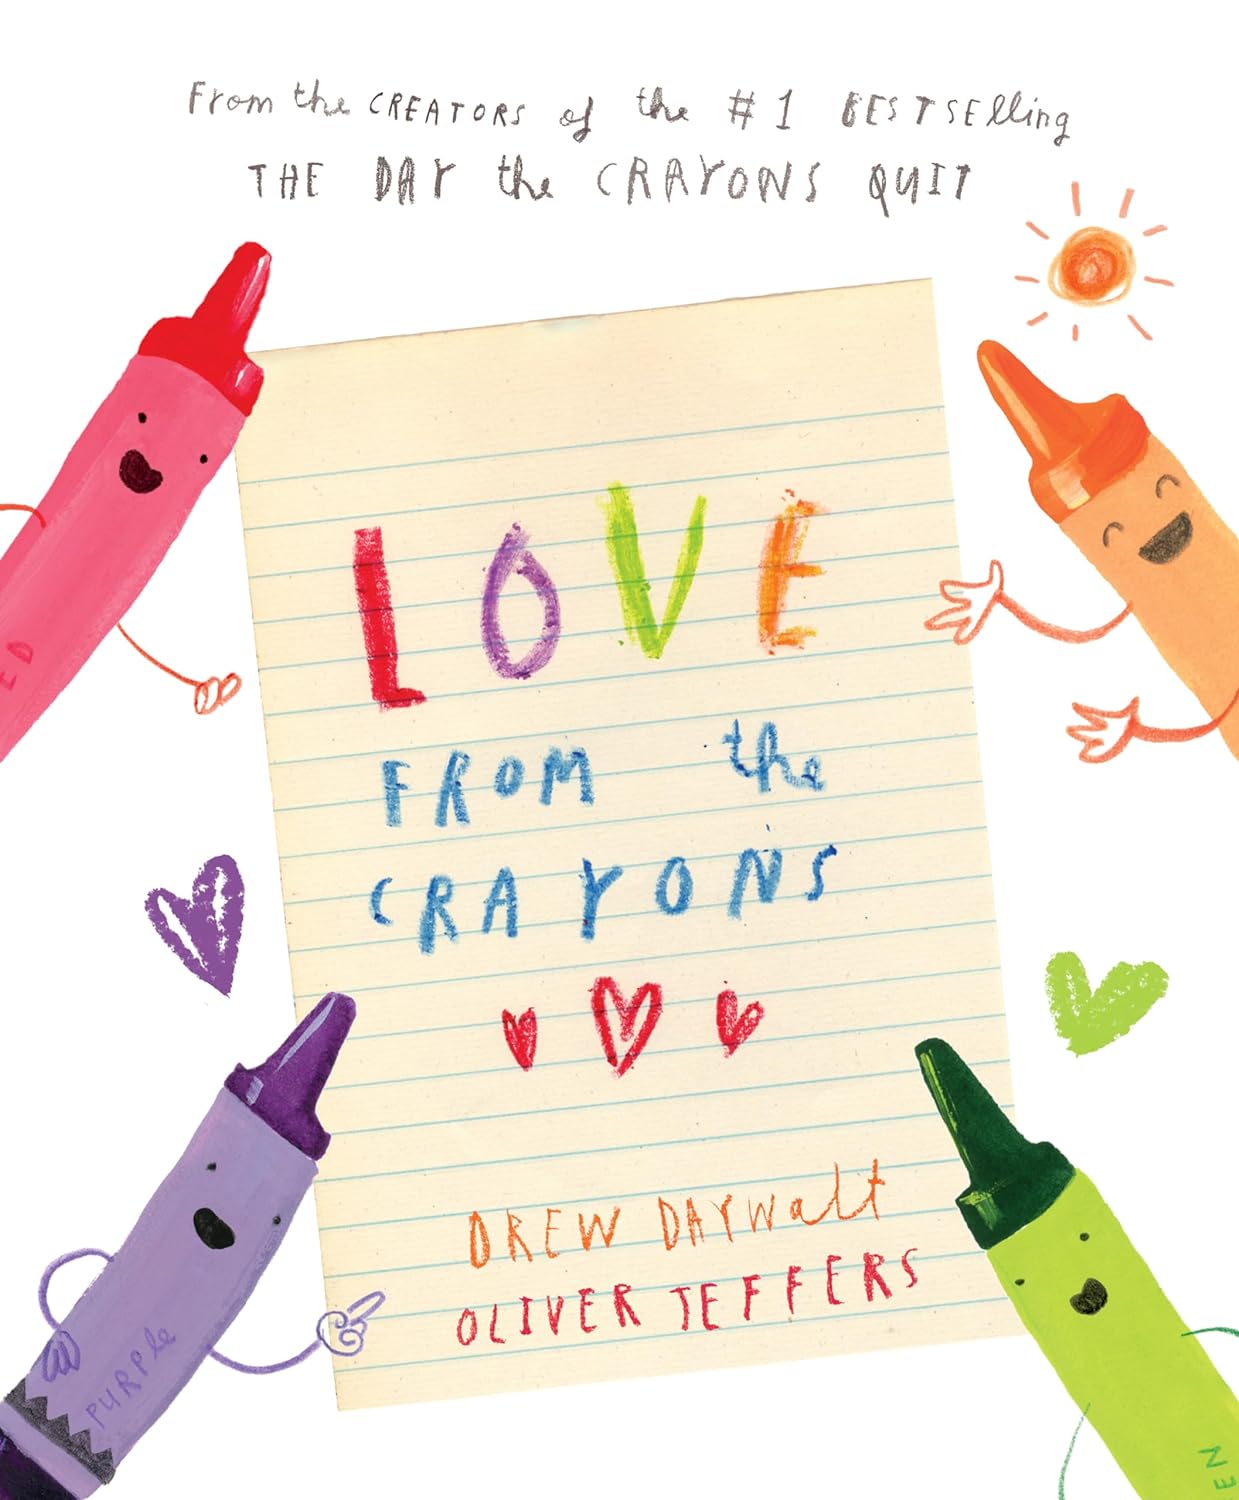 “Love from the Crayons” by Drew Daywalt